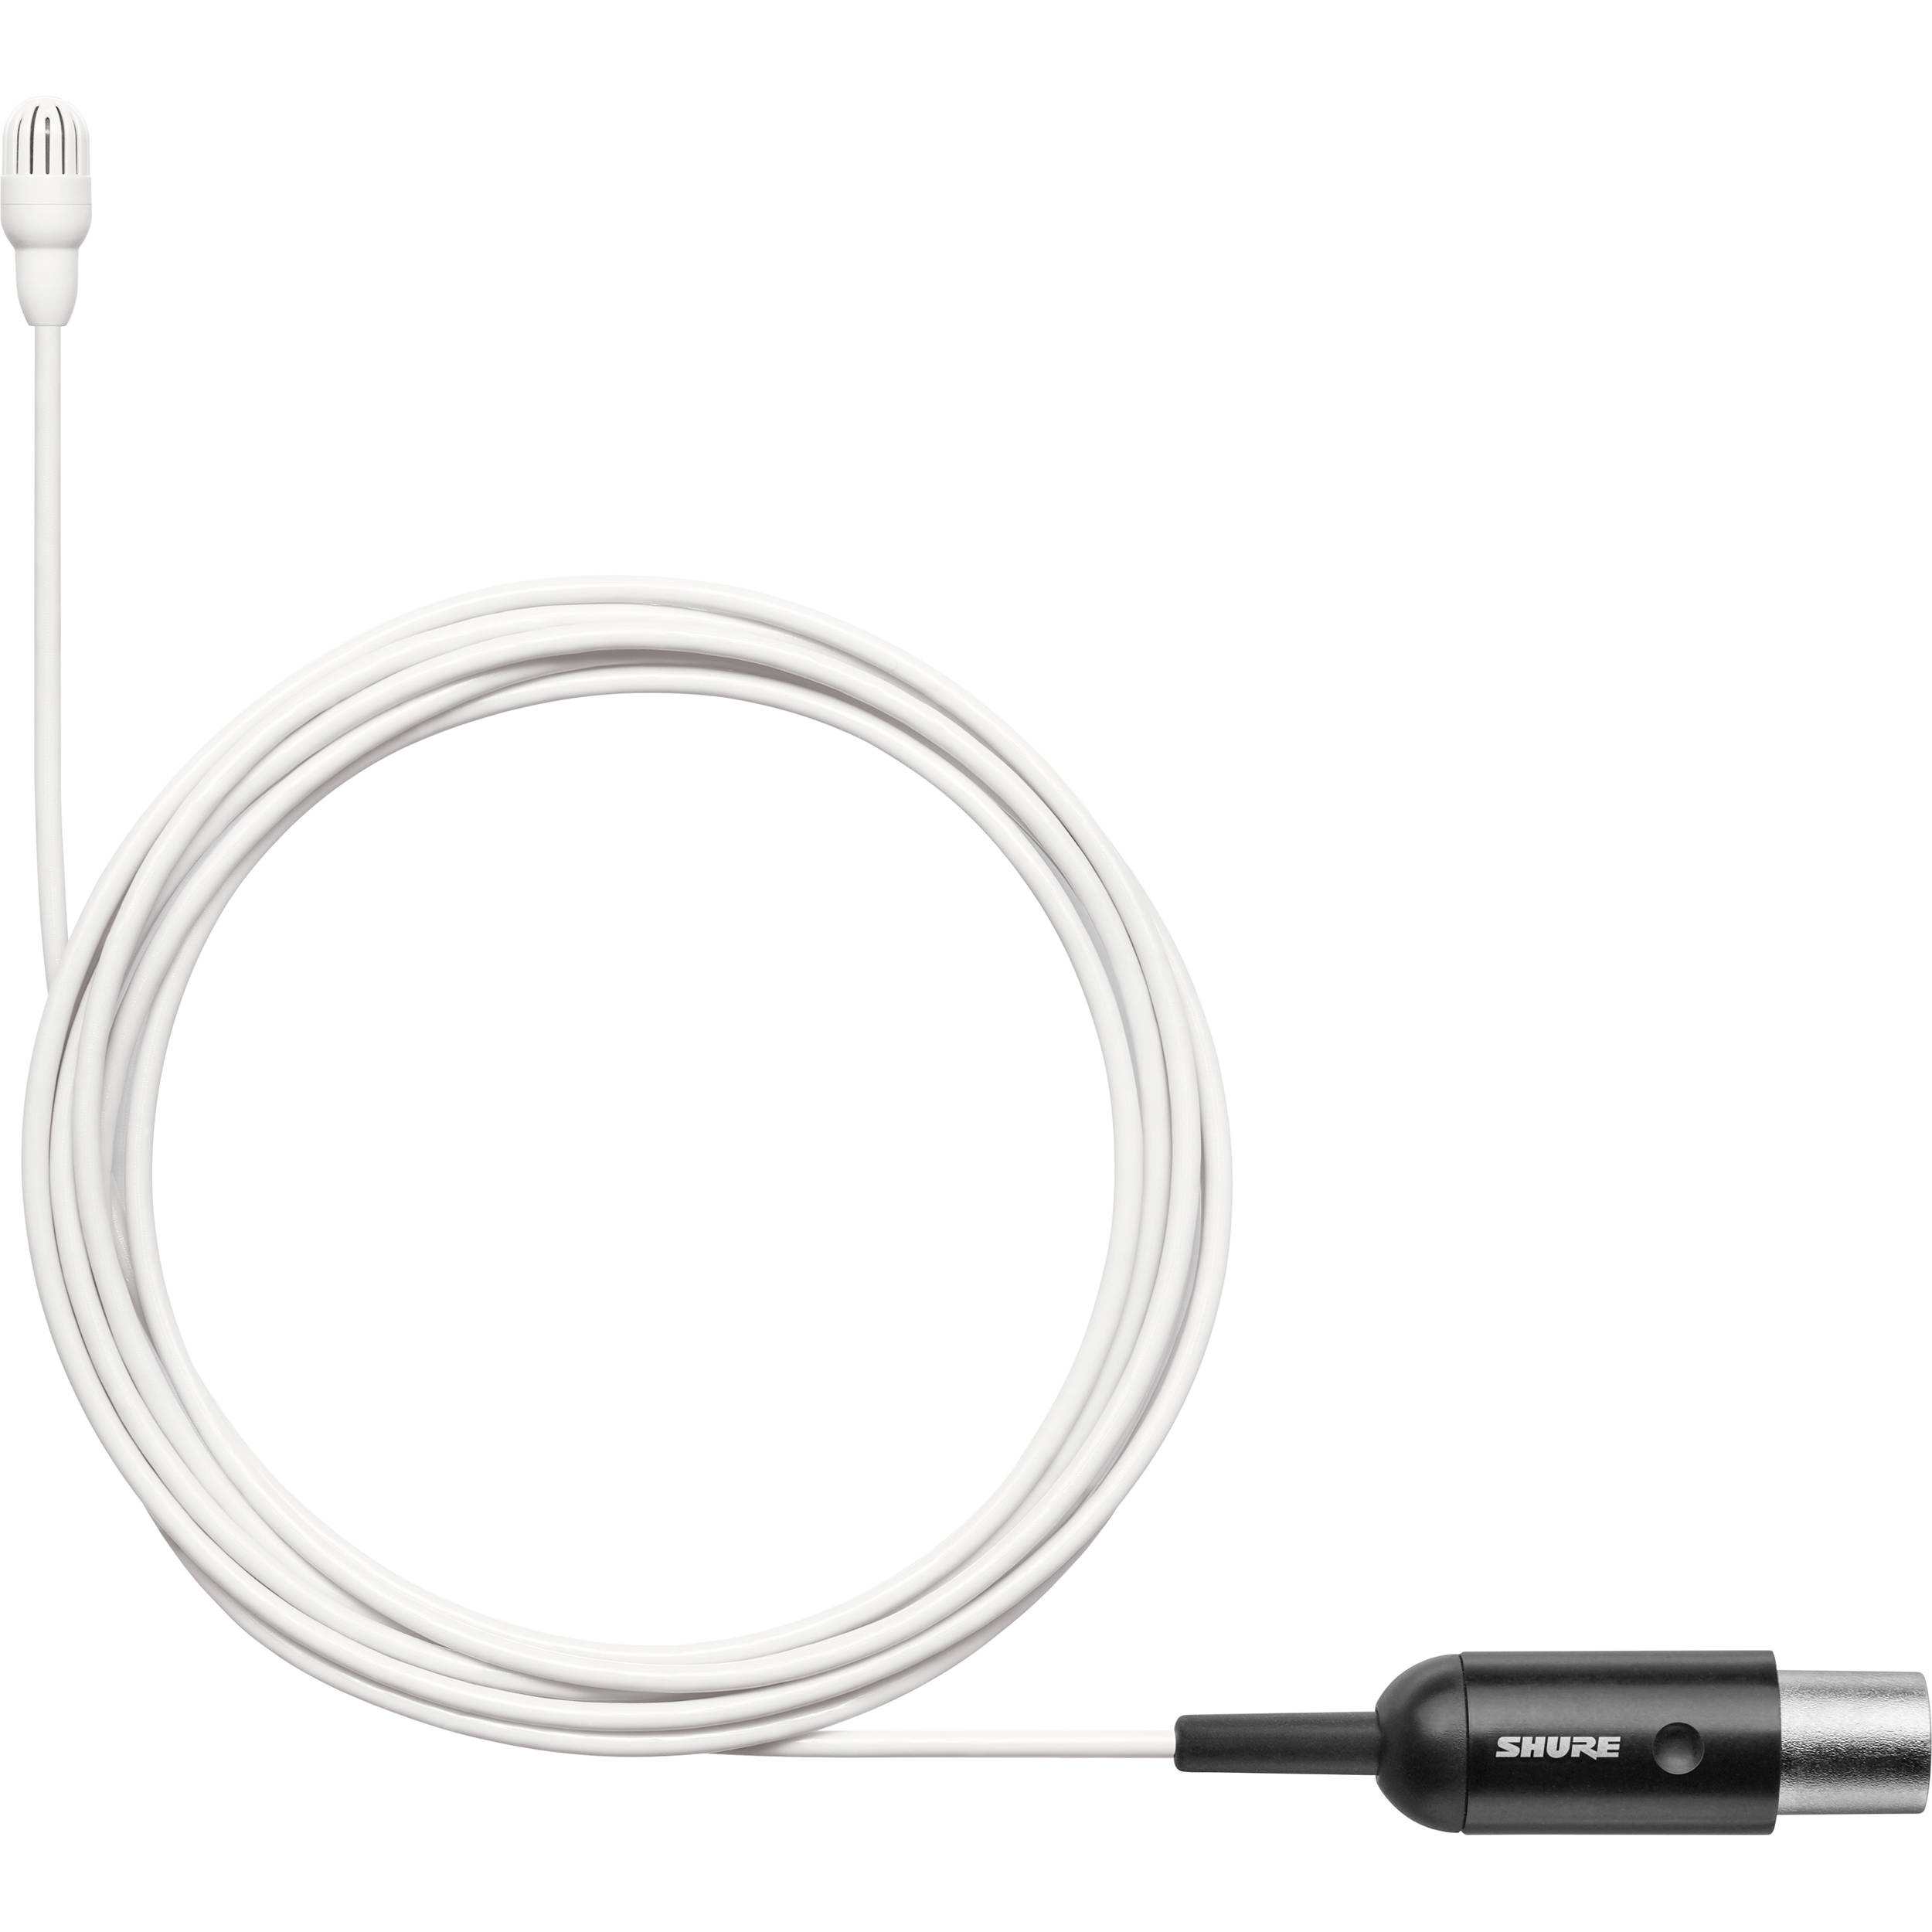 Shure TwinPlex TL47 Omnidirectional Lavalier Microphone with Accessories (TA4F, White)